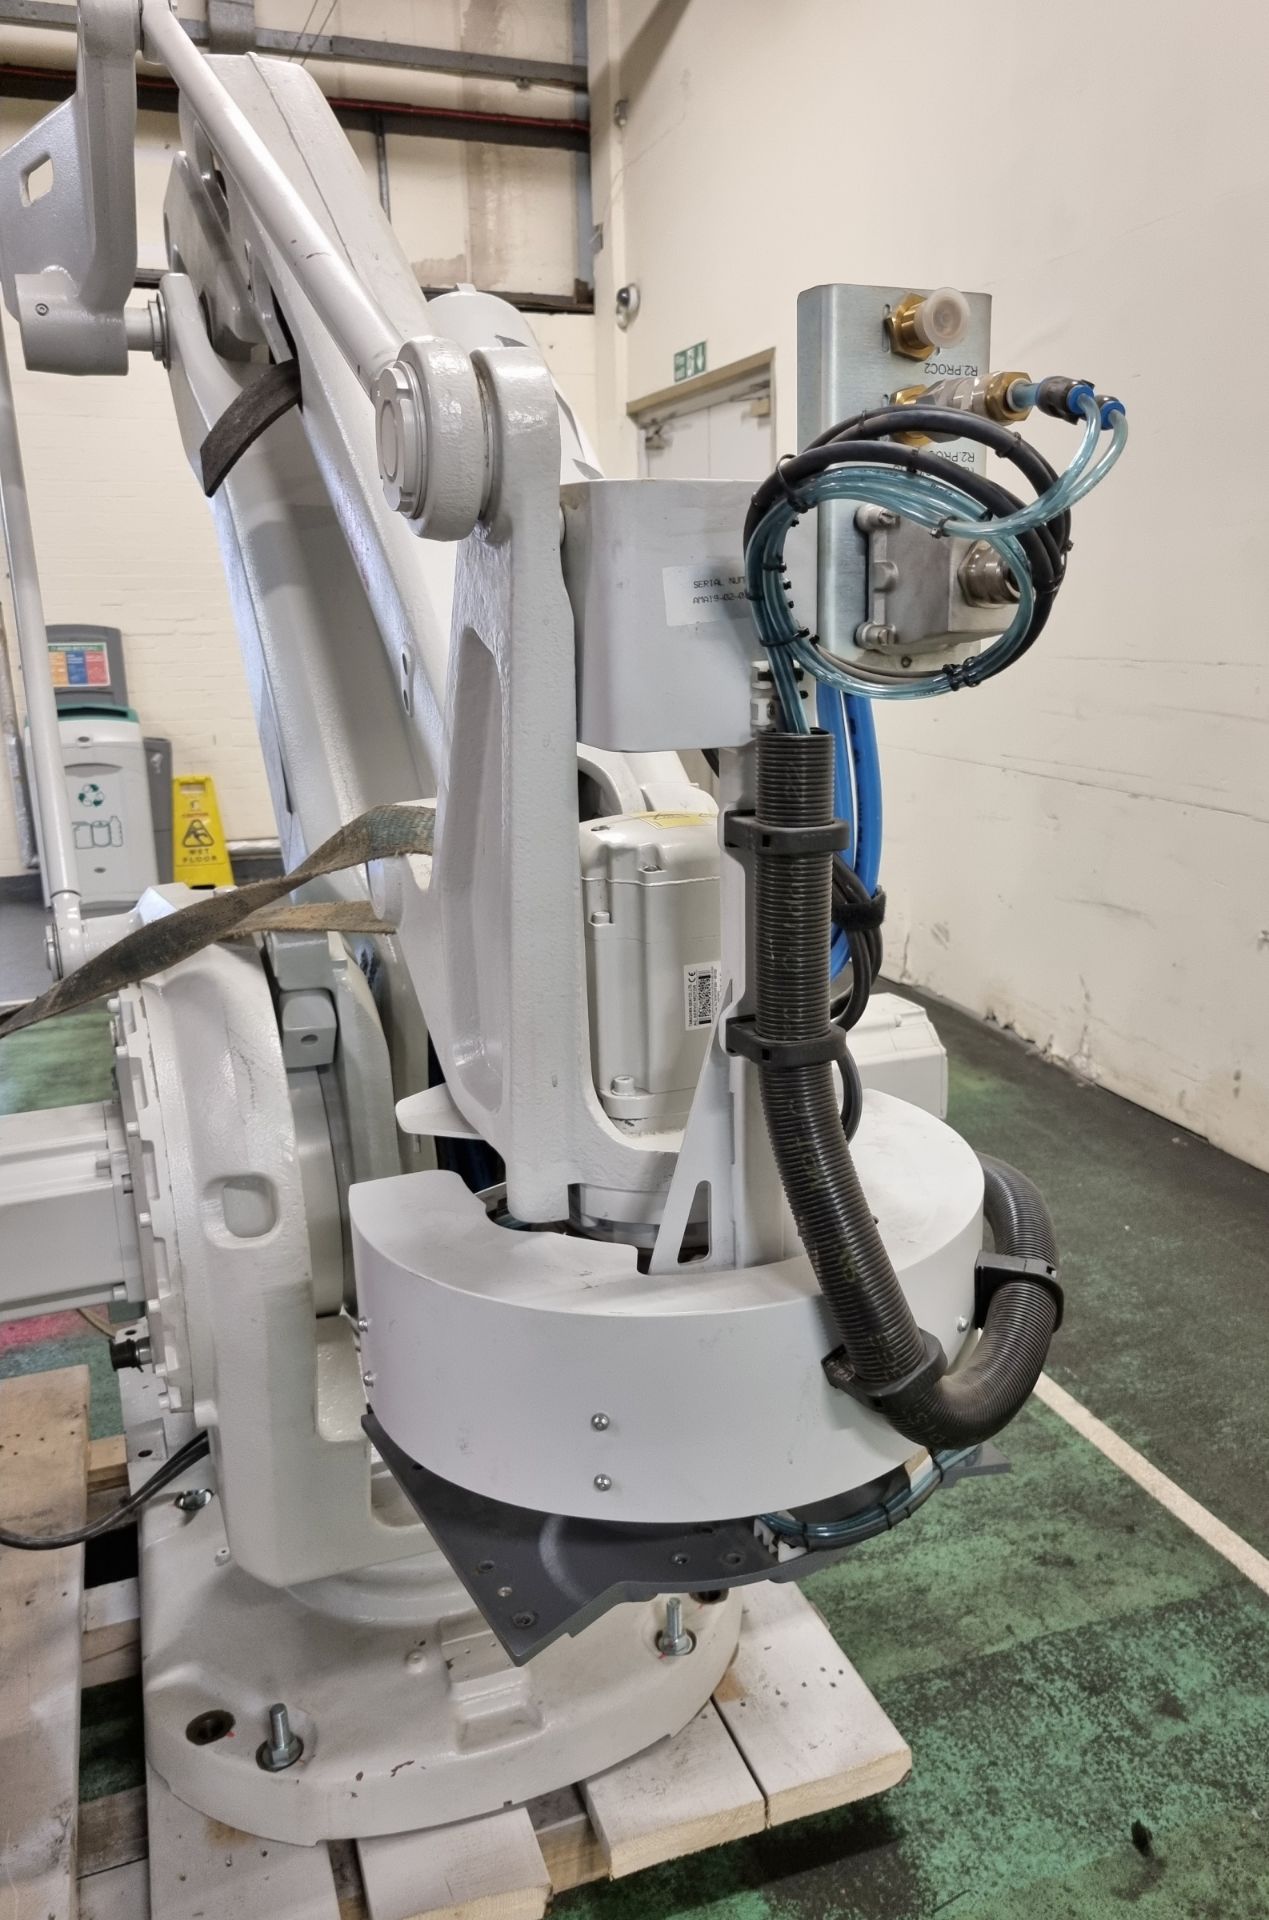 ABB AB IRB 660 4 axis articulated robot arm with ABB IRC5 Single robot control panel - Image 10 of 55